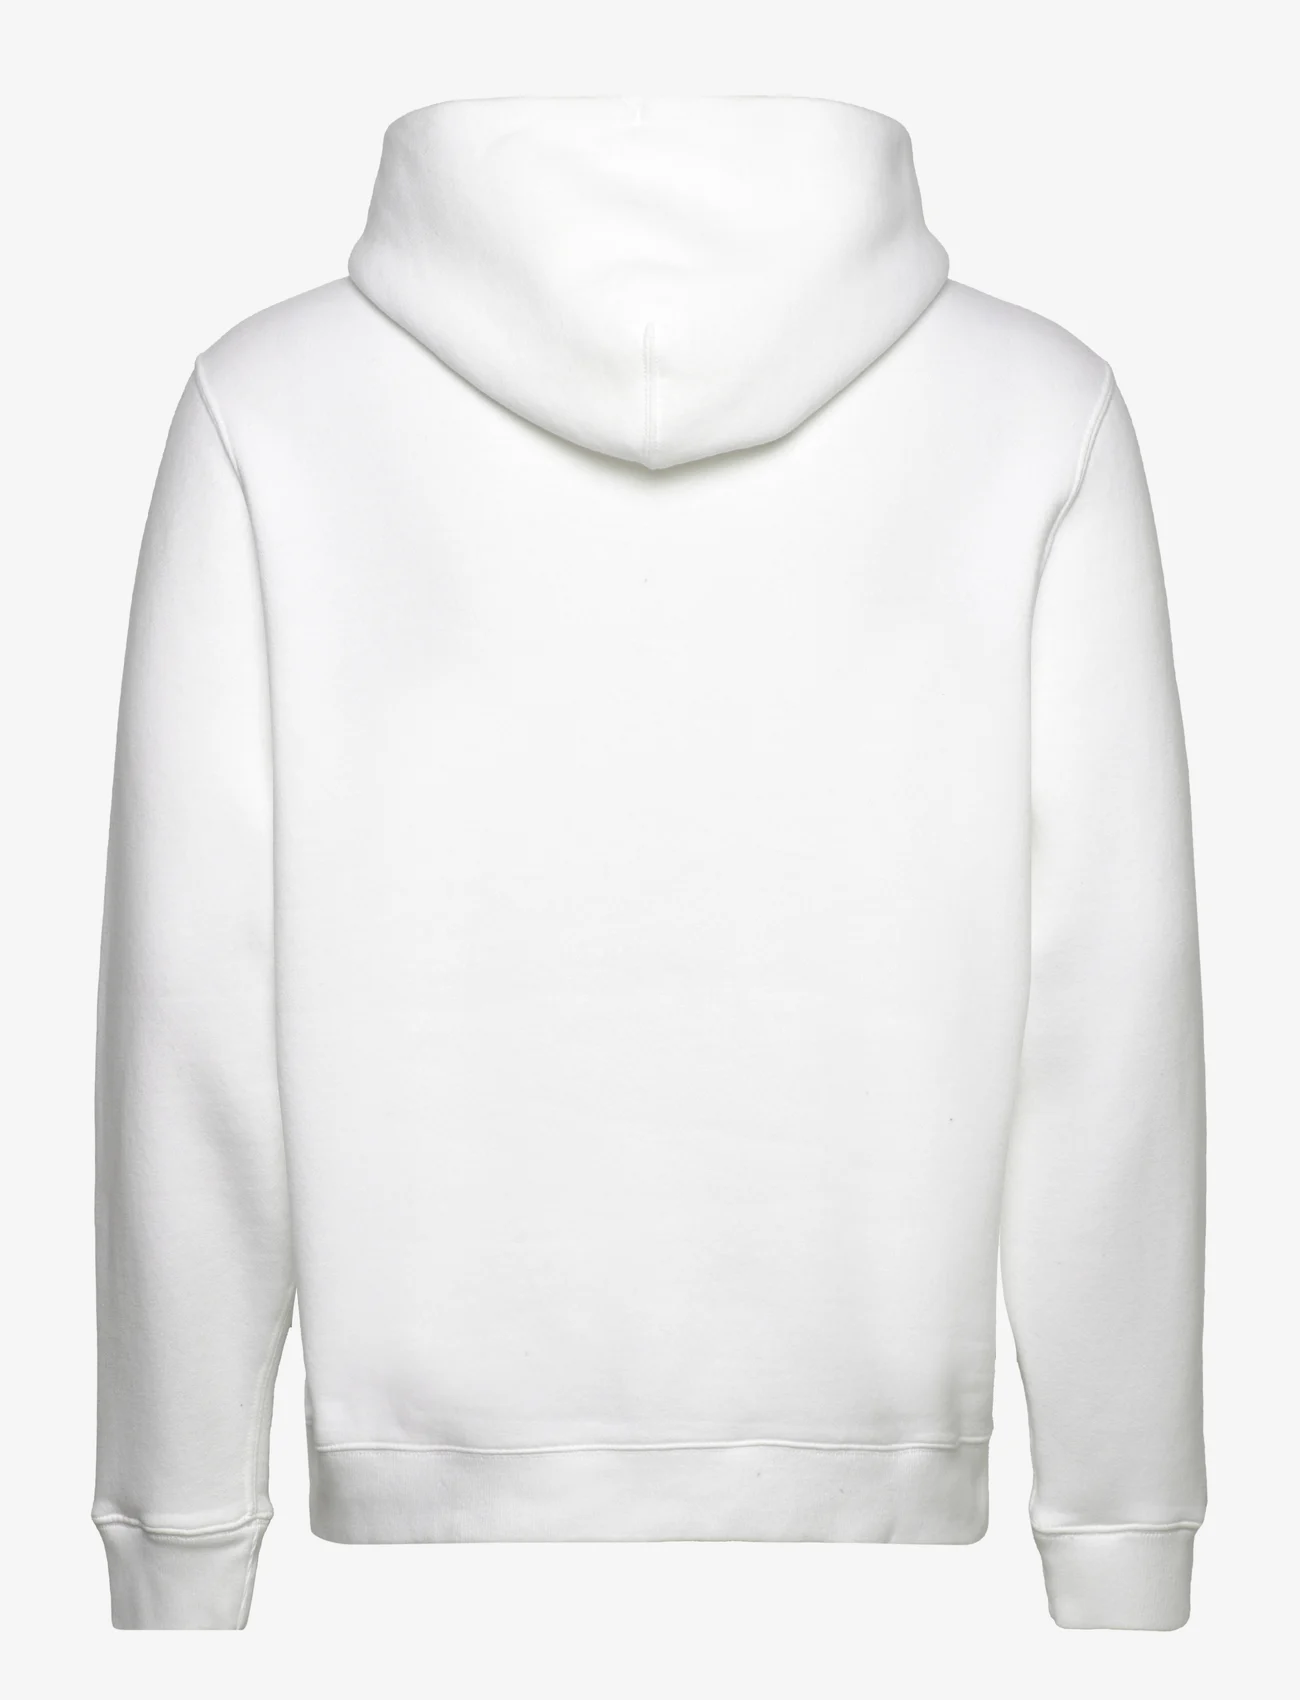 Abercrombie & Fitch - ANF MENS SWEATSHIRTS - hoodies - white - 1